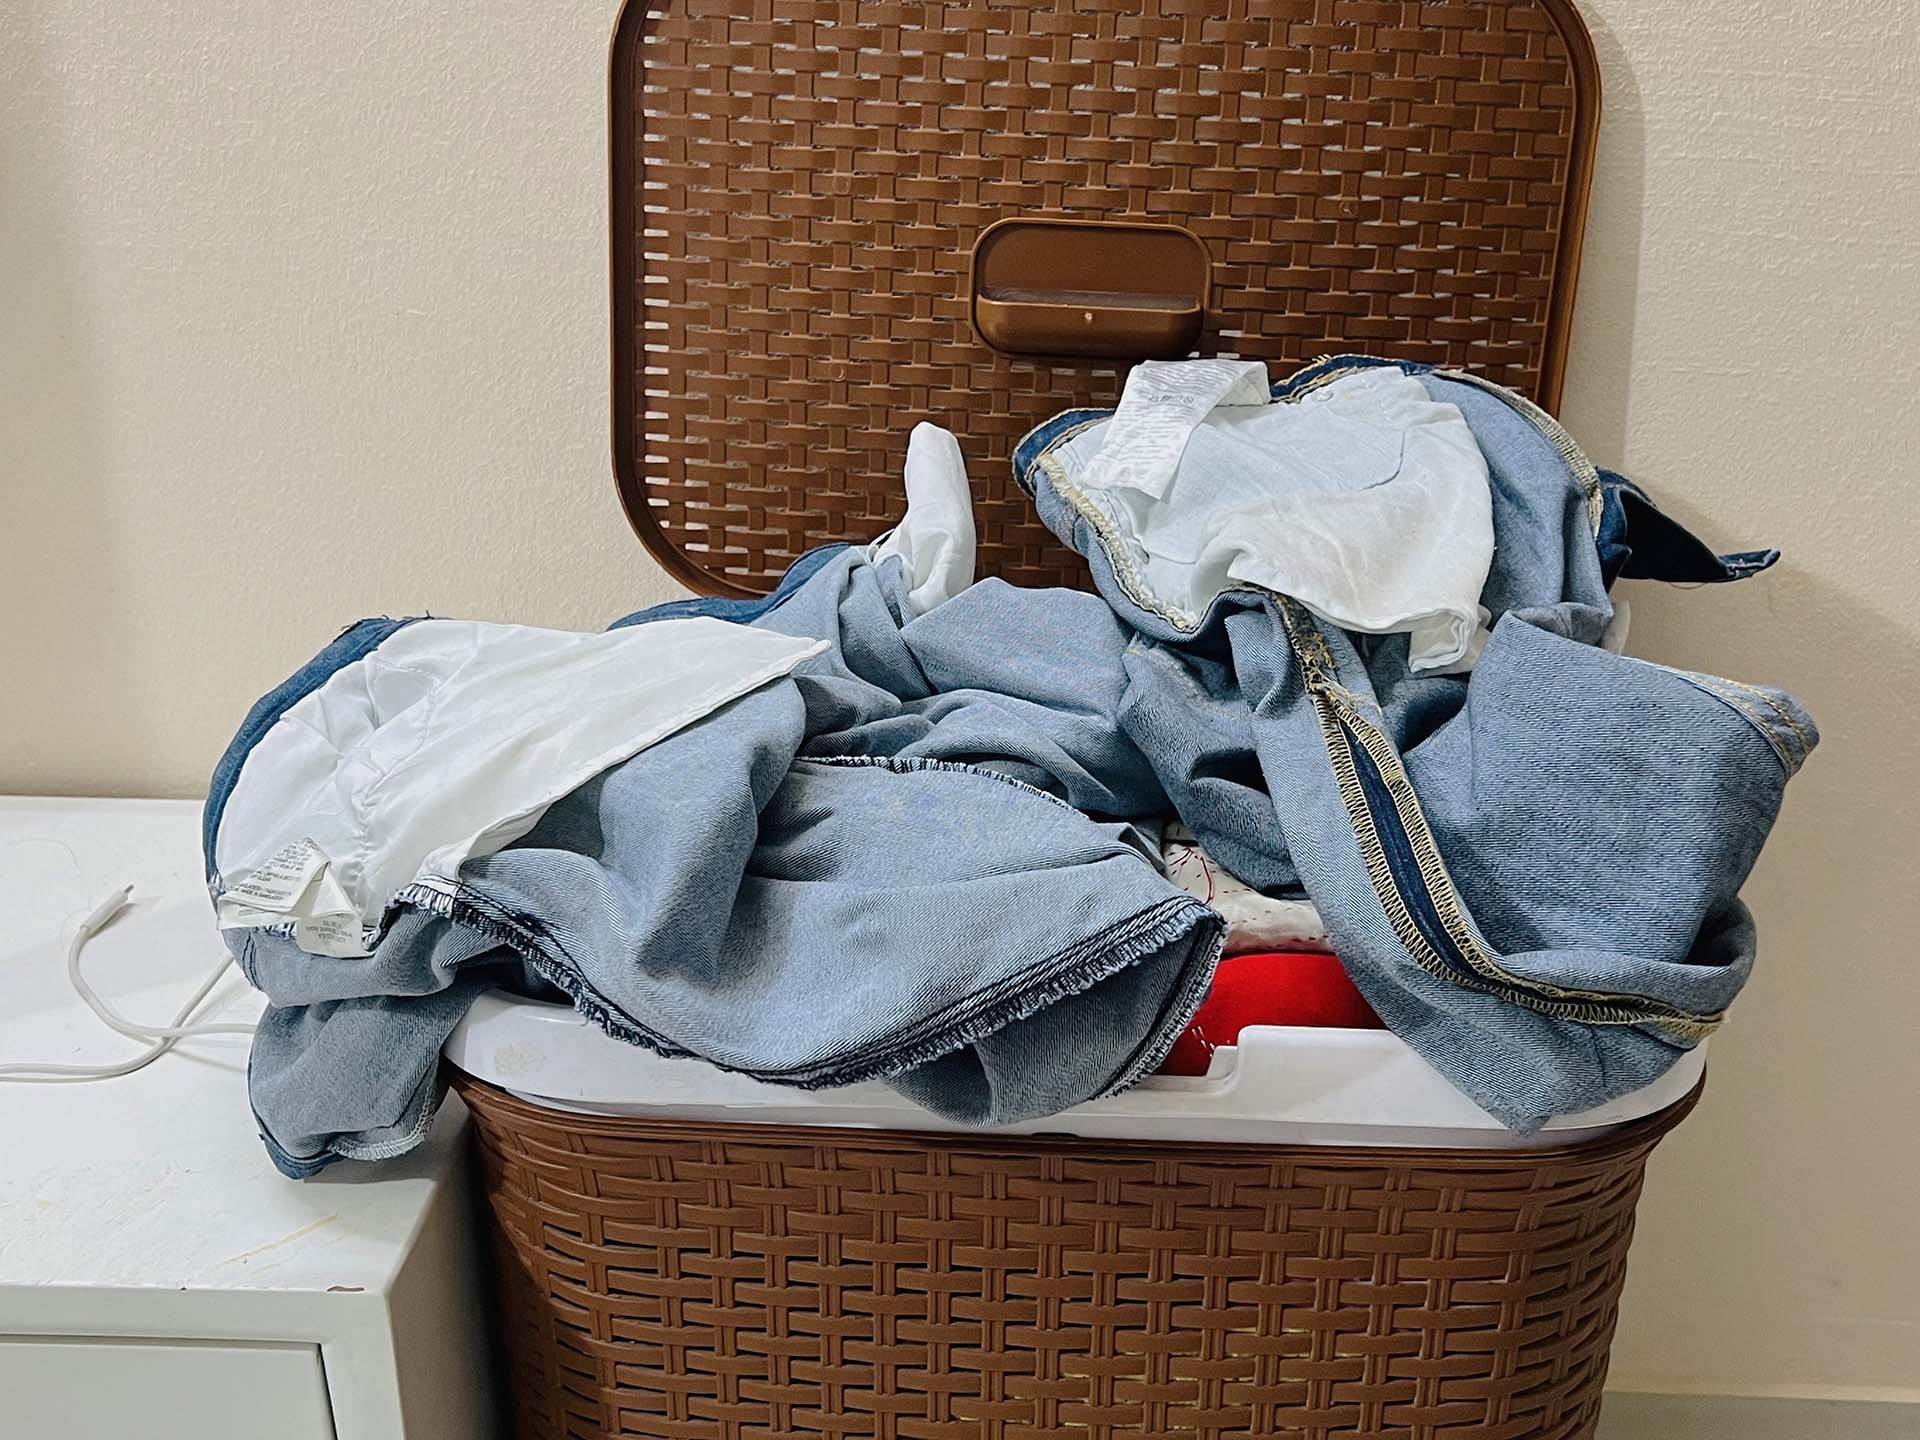 Can You Wash Jeans With Towels?